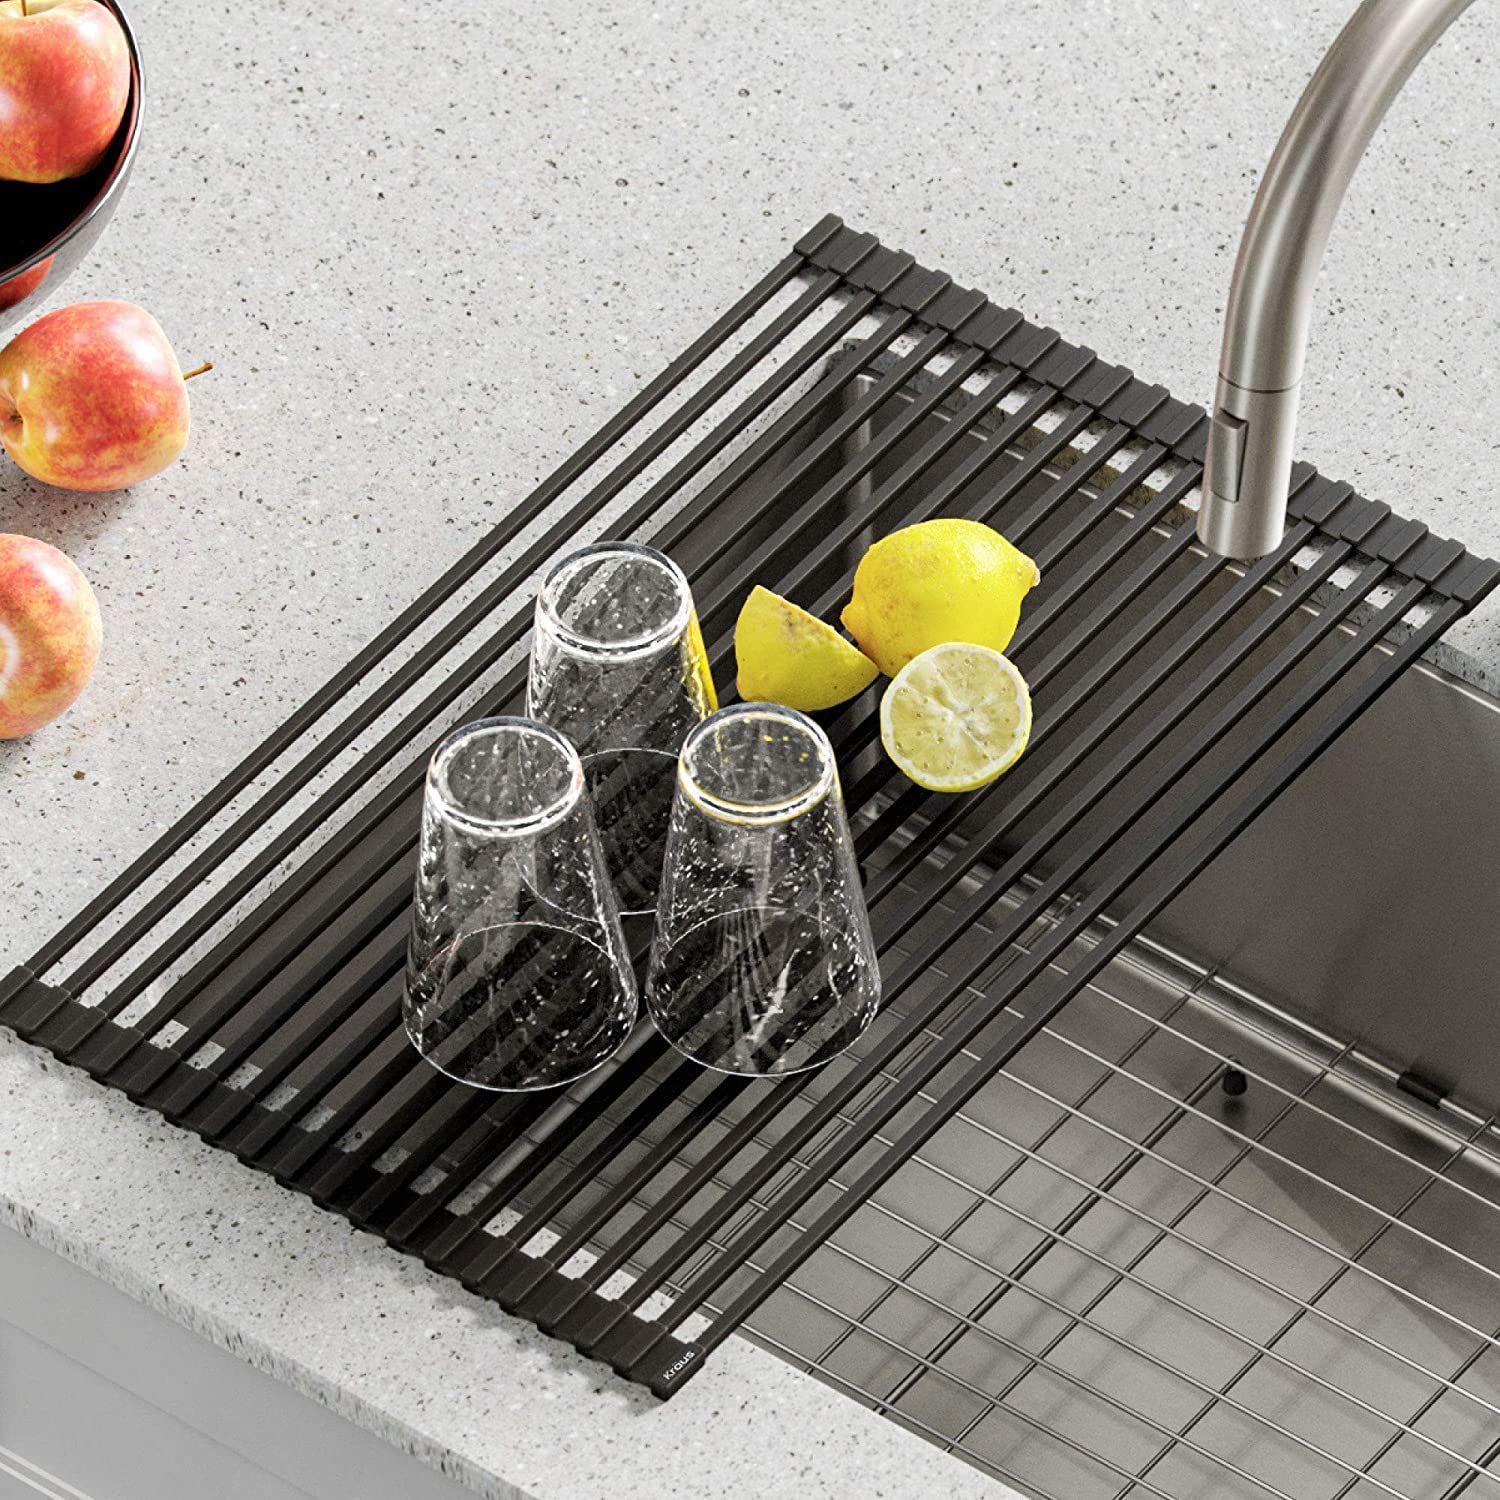 https://www.vmcdn.ca/f/files/glaciermedia/images/endorsed/roll-over-rack-for-dishes.jpg